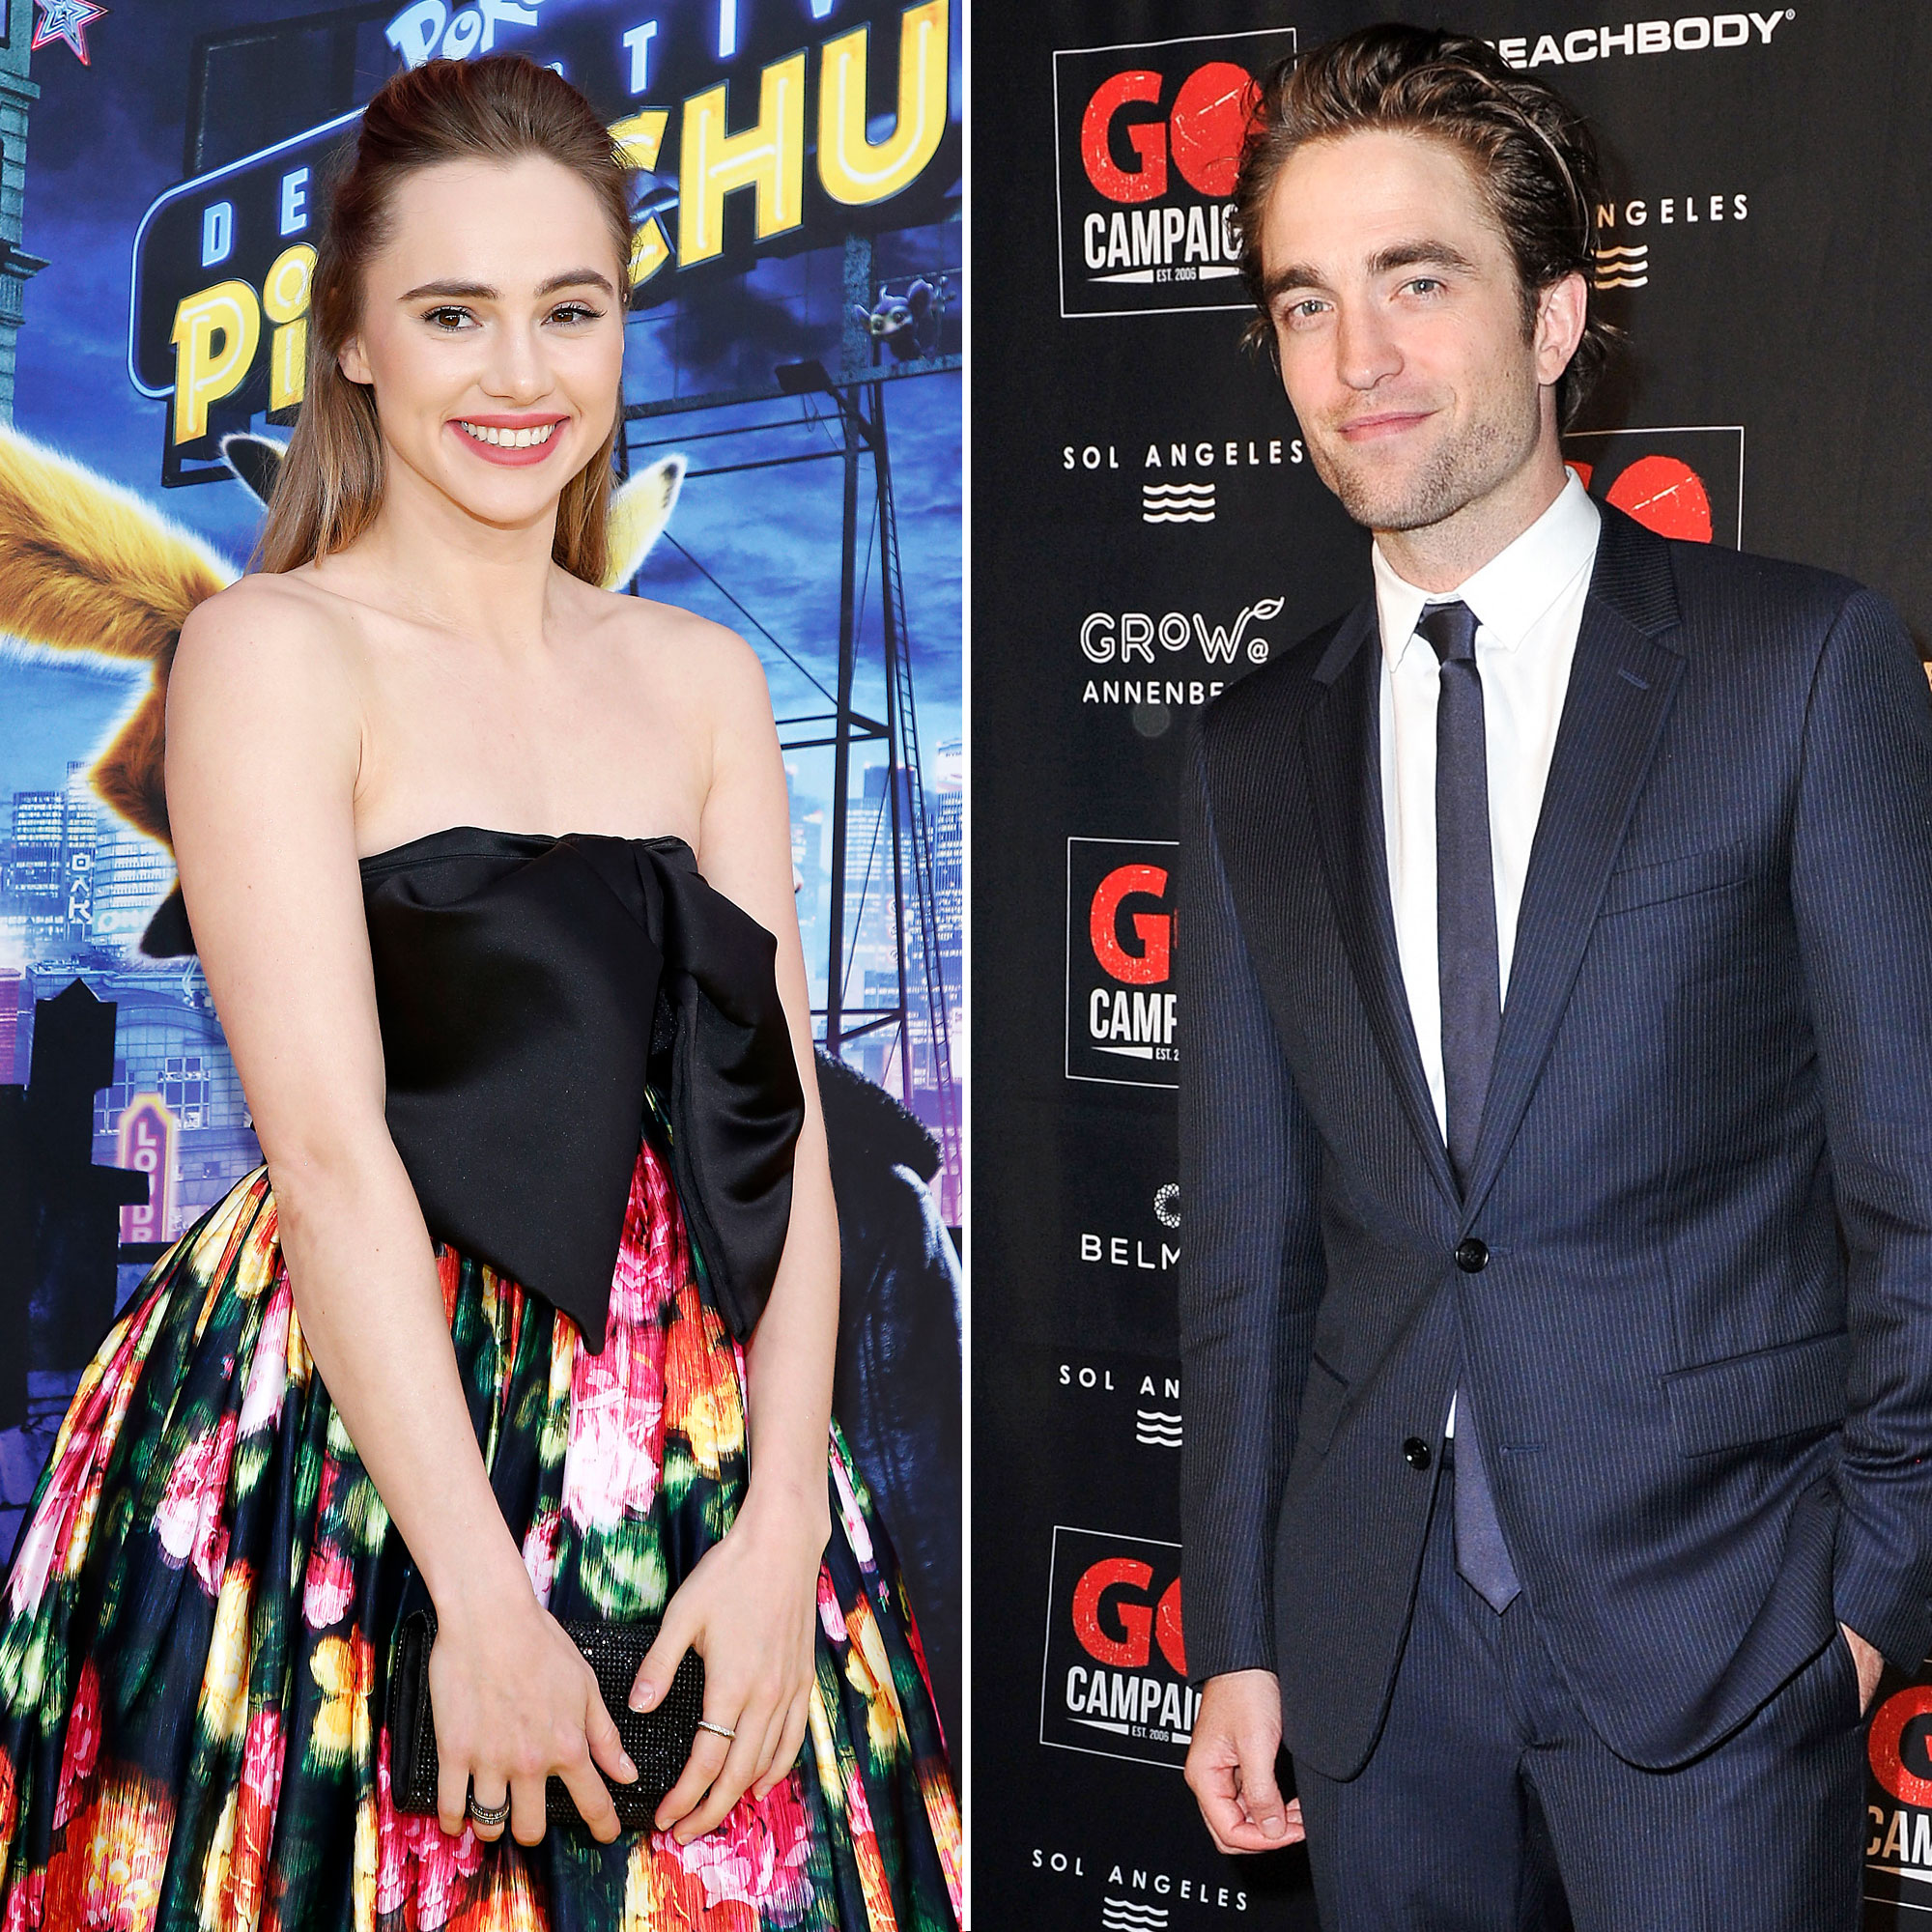 Robert who pattinson date does Are Robert